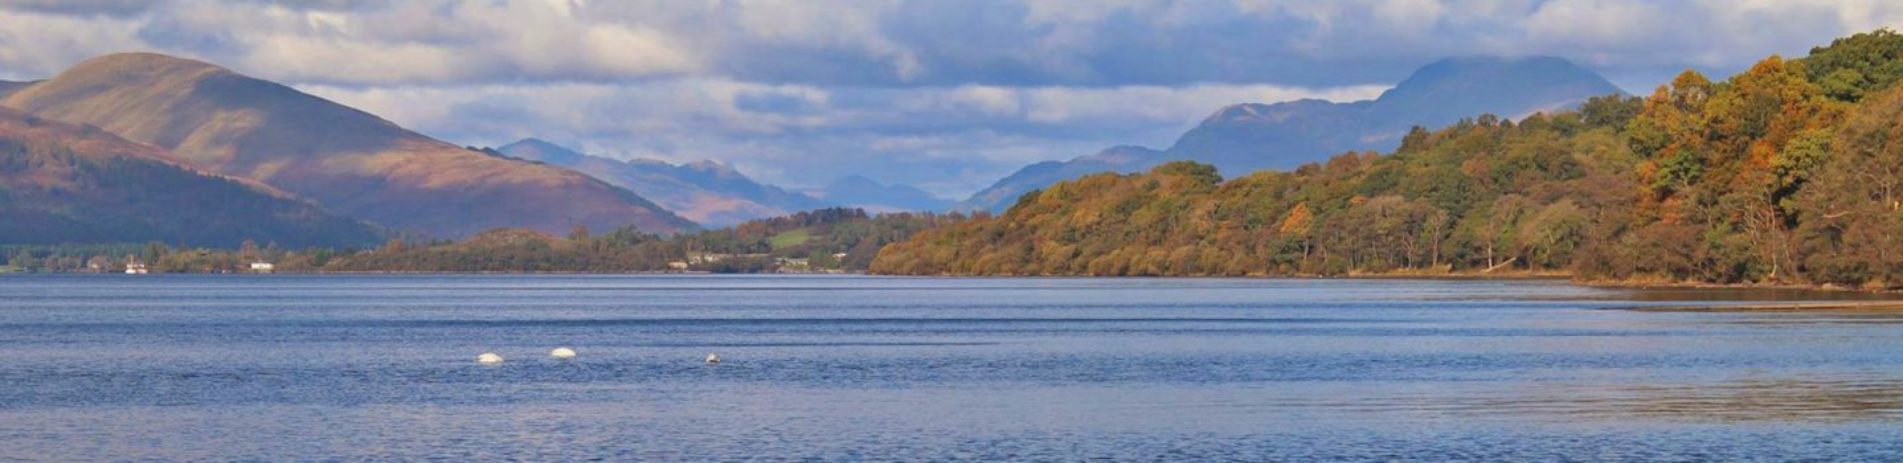 loch-lomond-and-mountains-cloudy-day